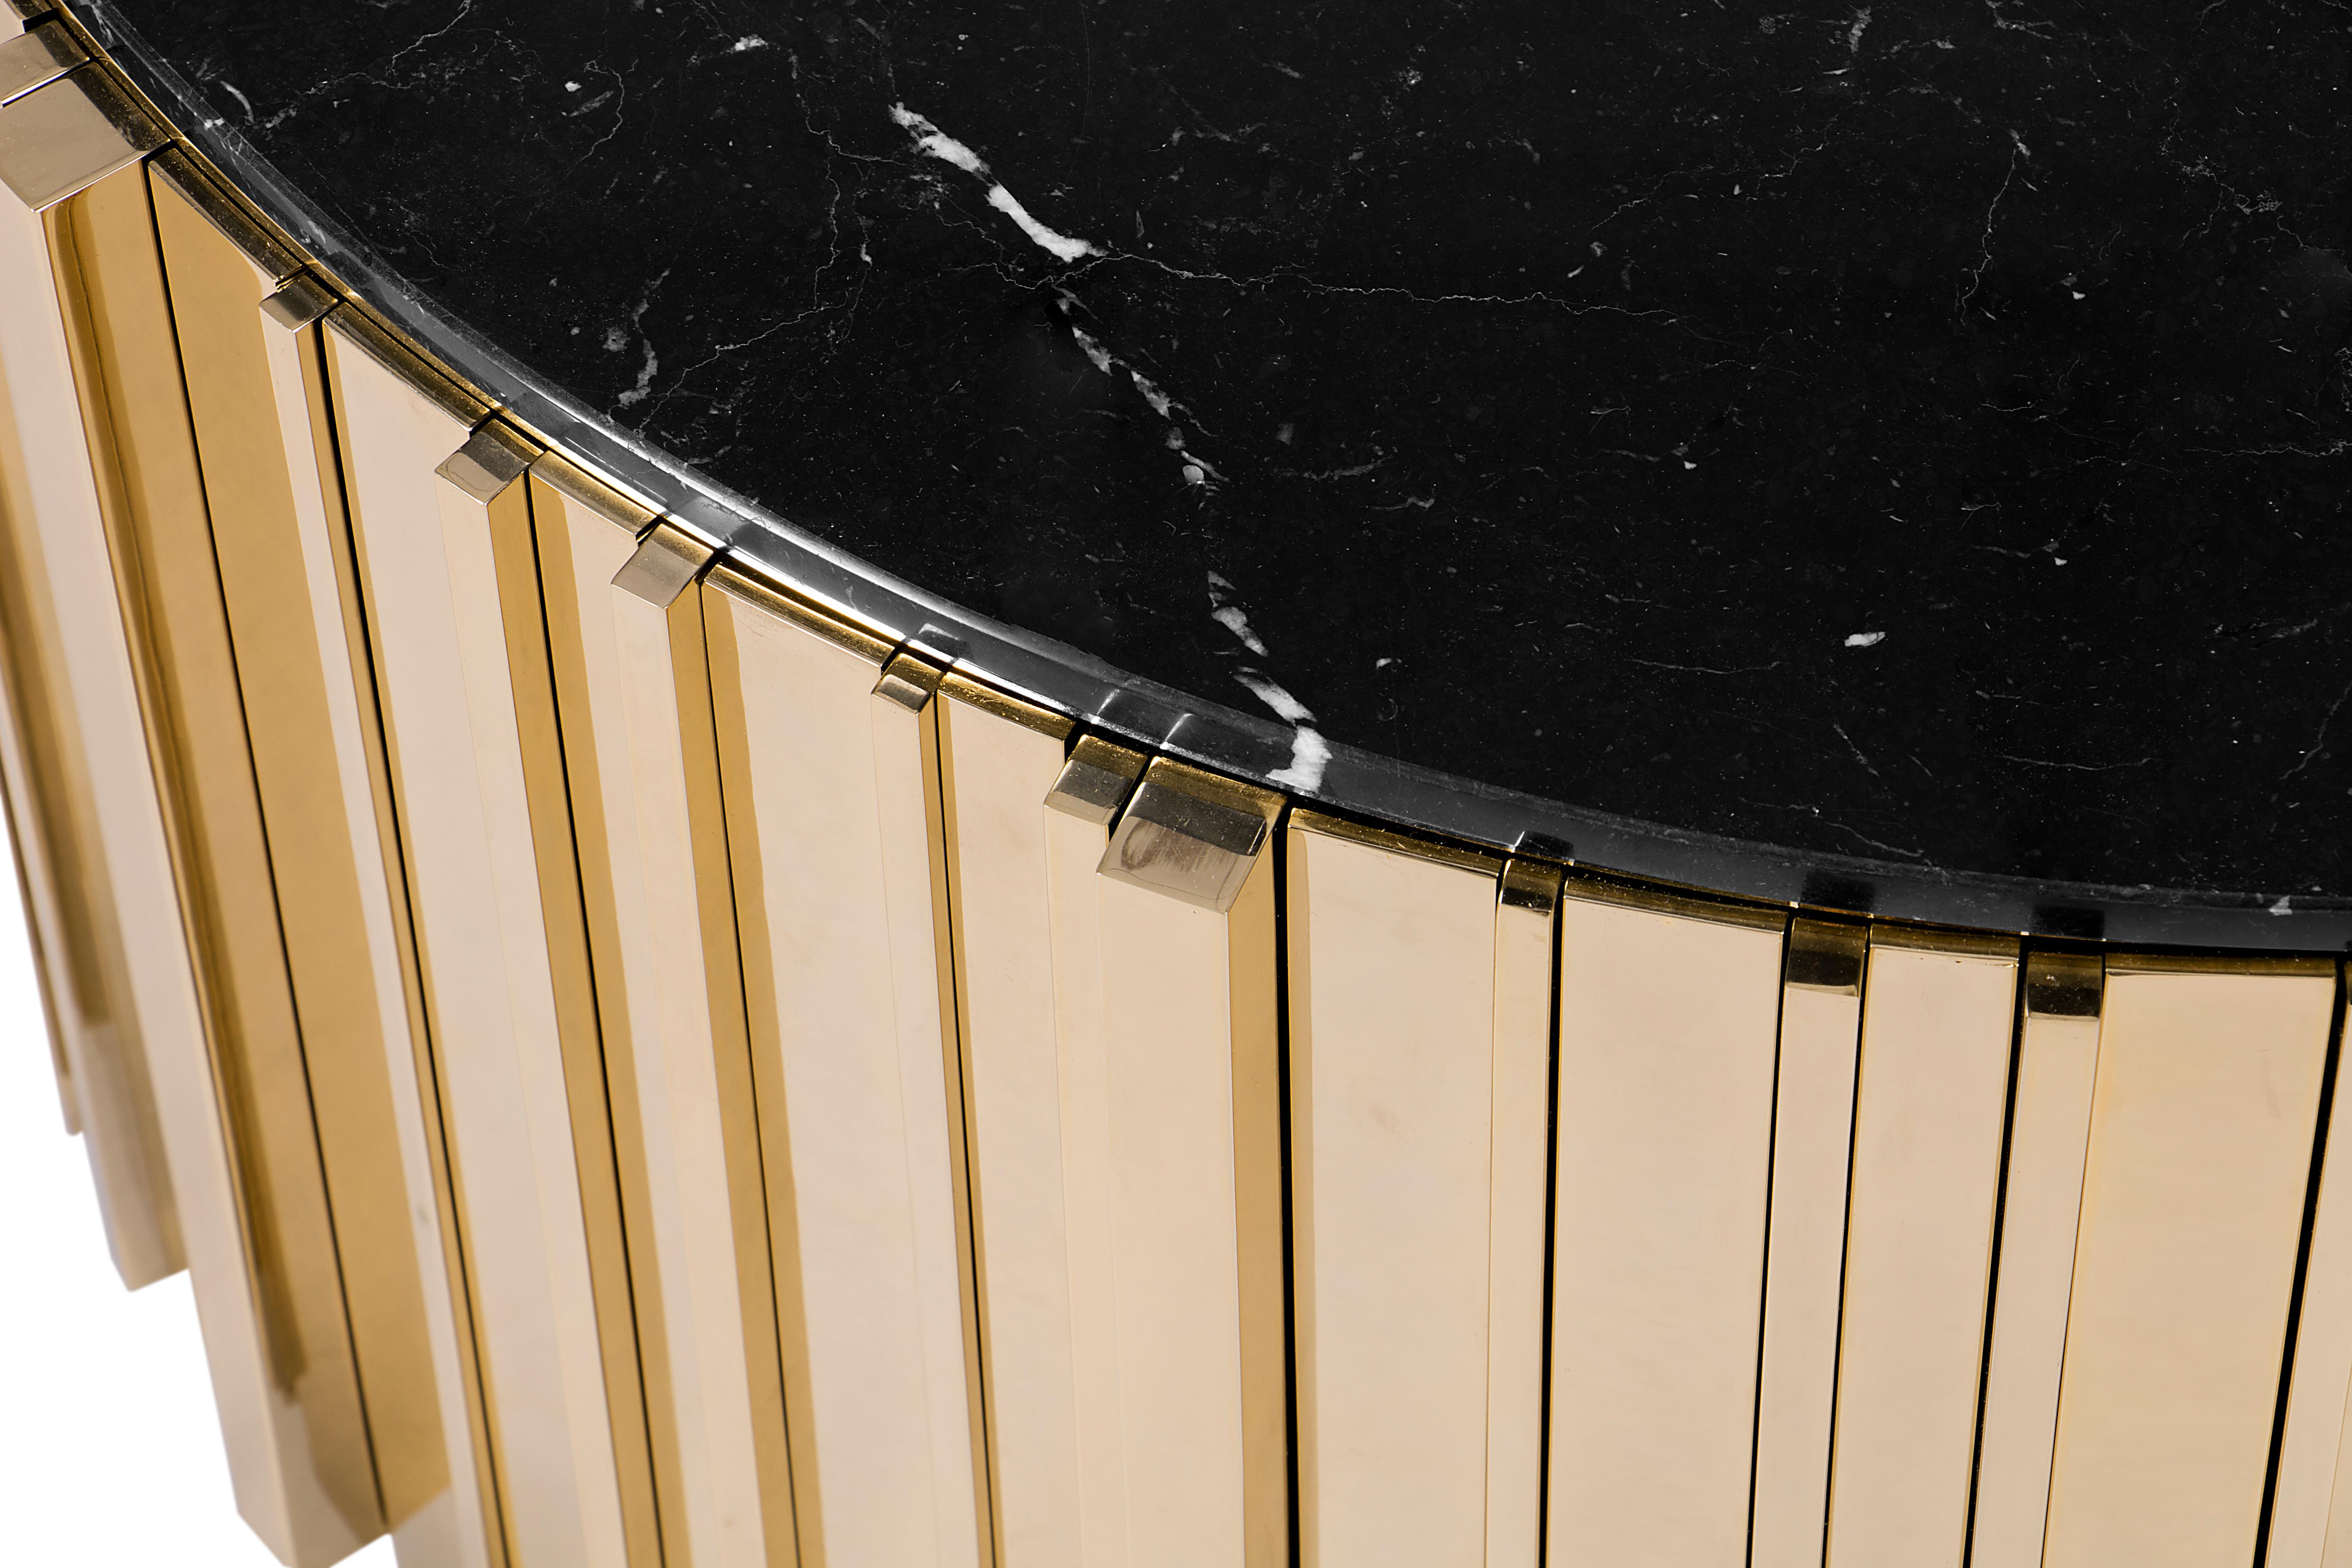 This coffee table has an extravagant shape of refinement and style. It is carefully made in brass and Nero Marquina marble. This is a combination of classic and modern design, perfect for every interior setting.

